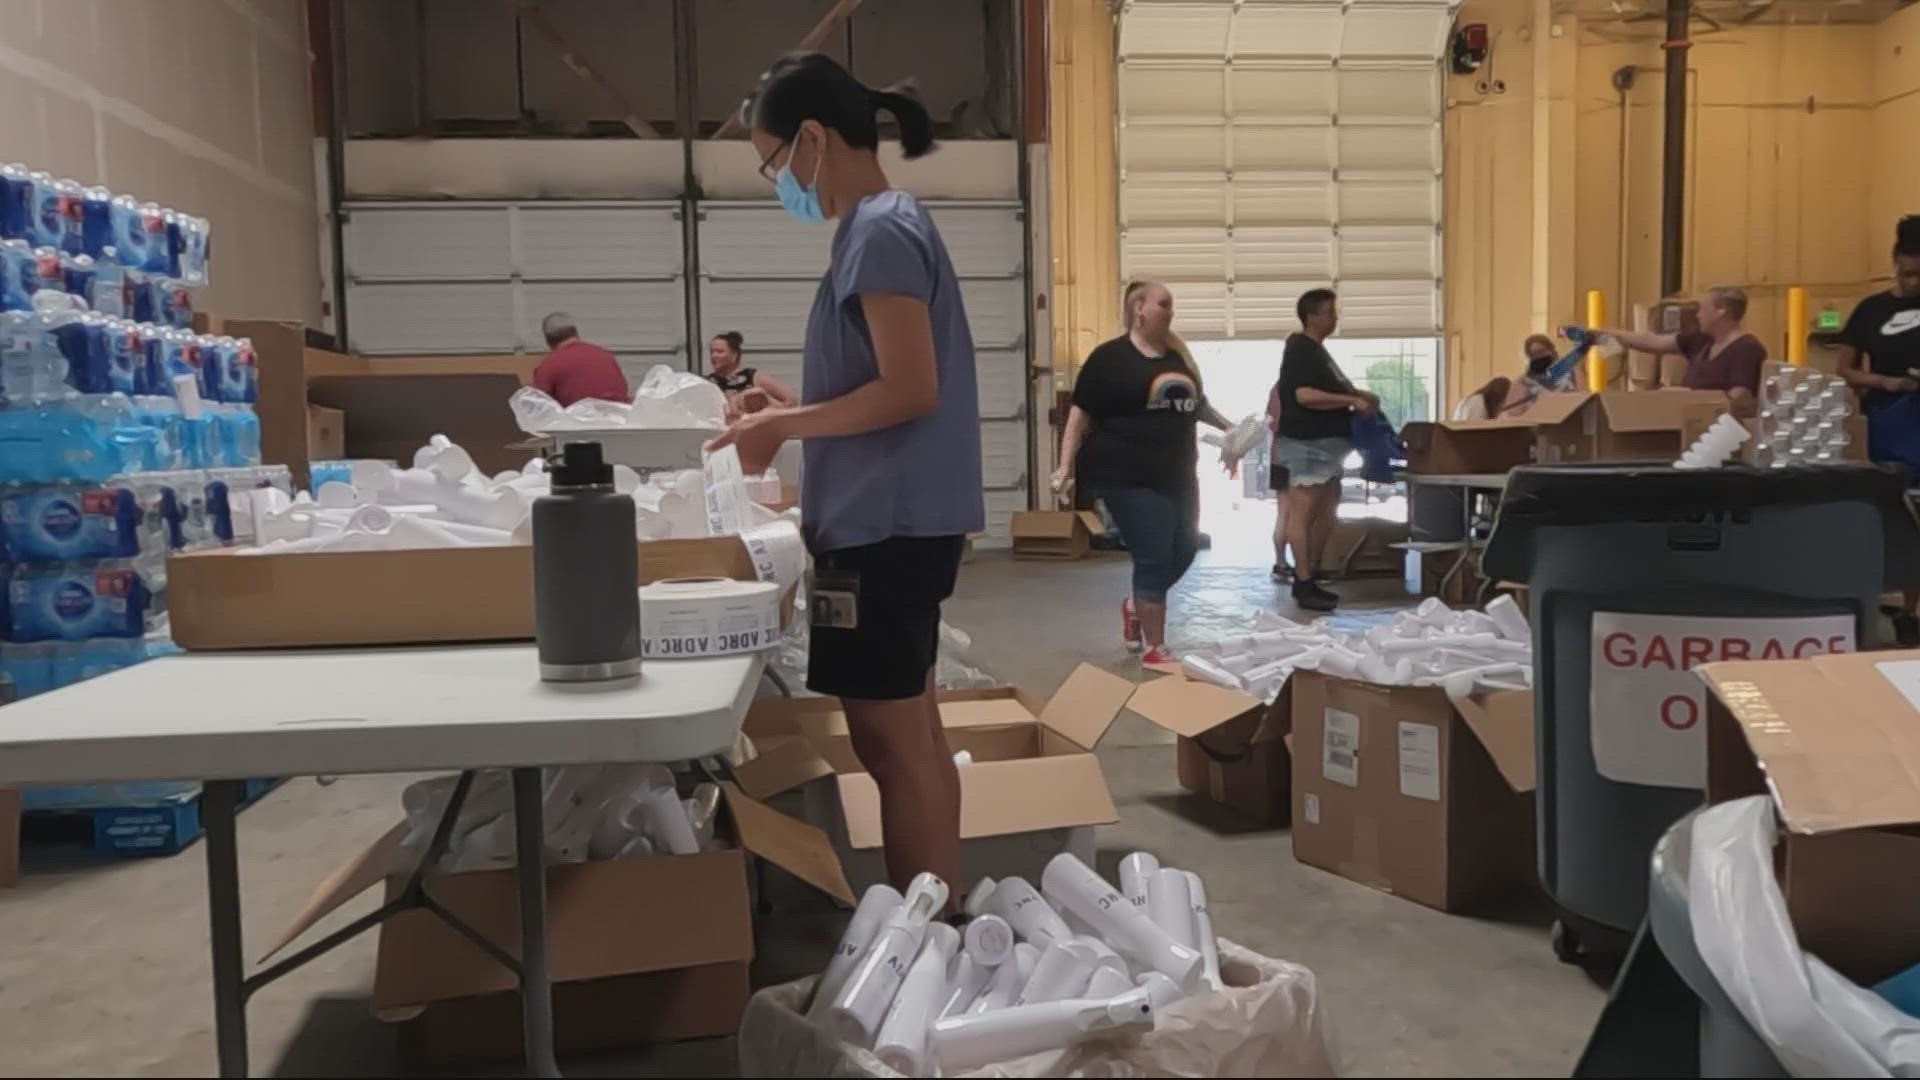 With temperatures climbing this weekend, county officials are working to distribute items that could help people cool off.